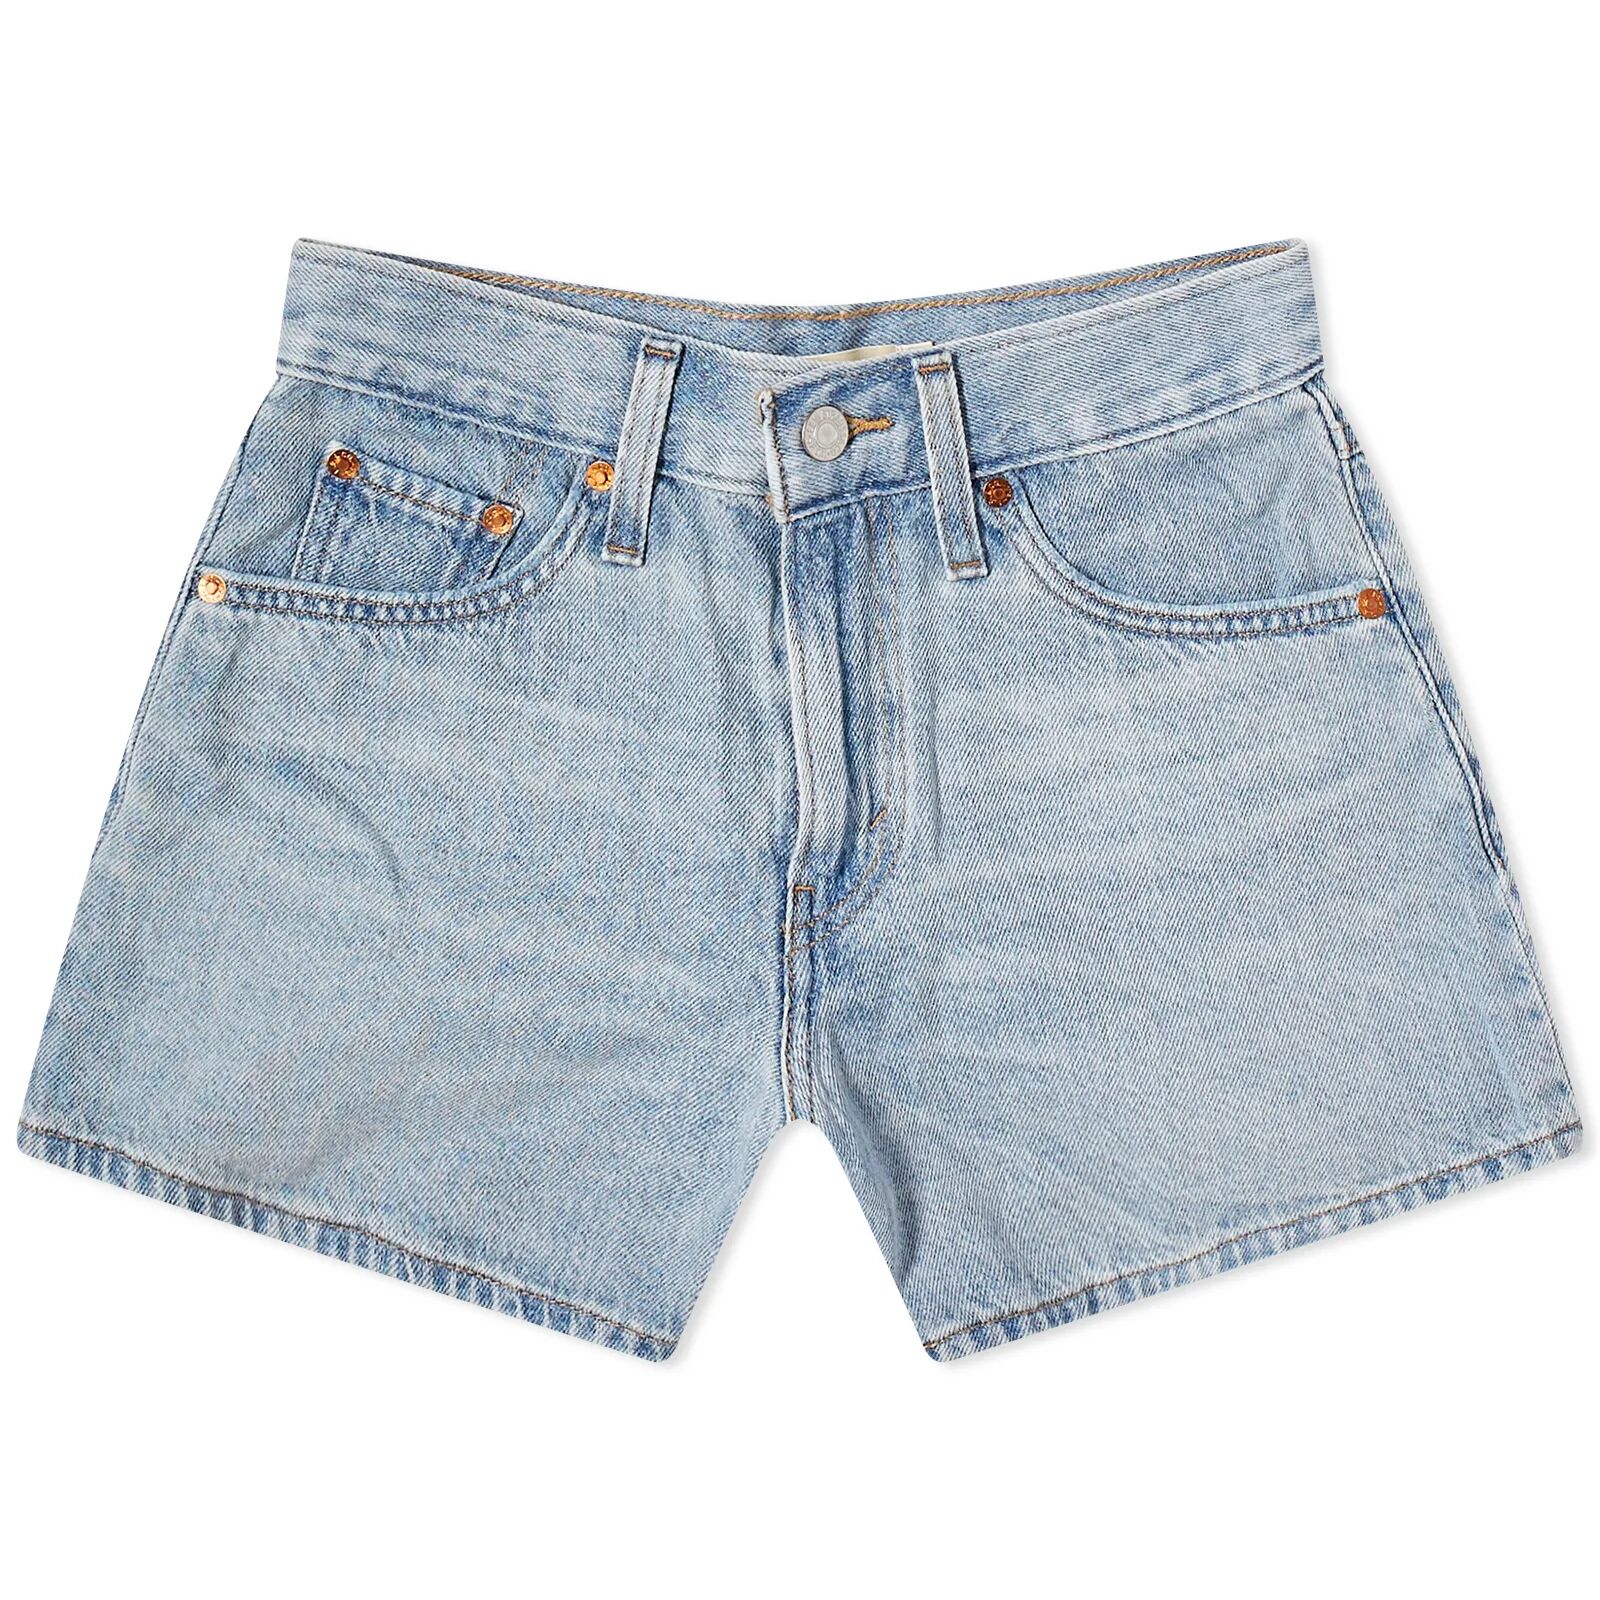 Levi’s Collections Women's Levis Vintage Clothing 80s Mom Shorts in Make A Difference, Size 26"